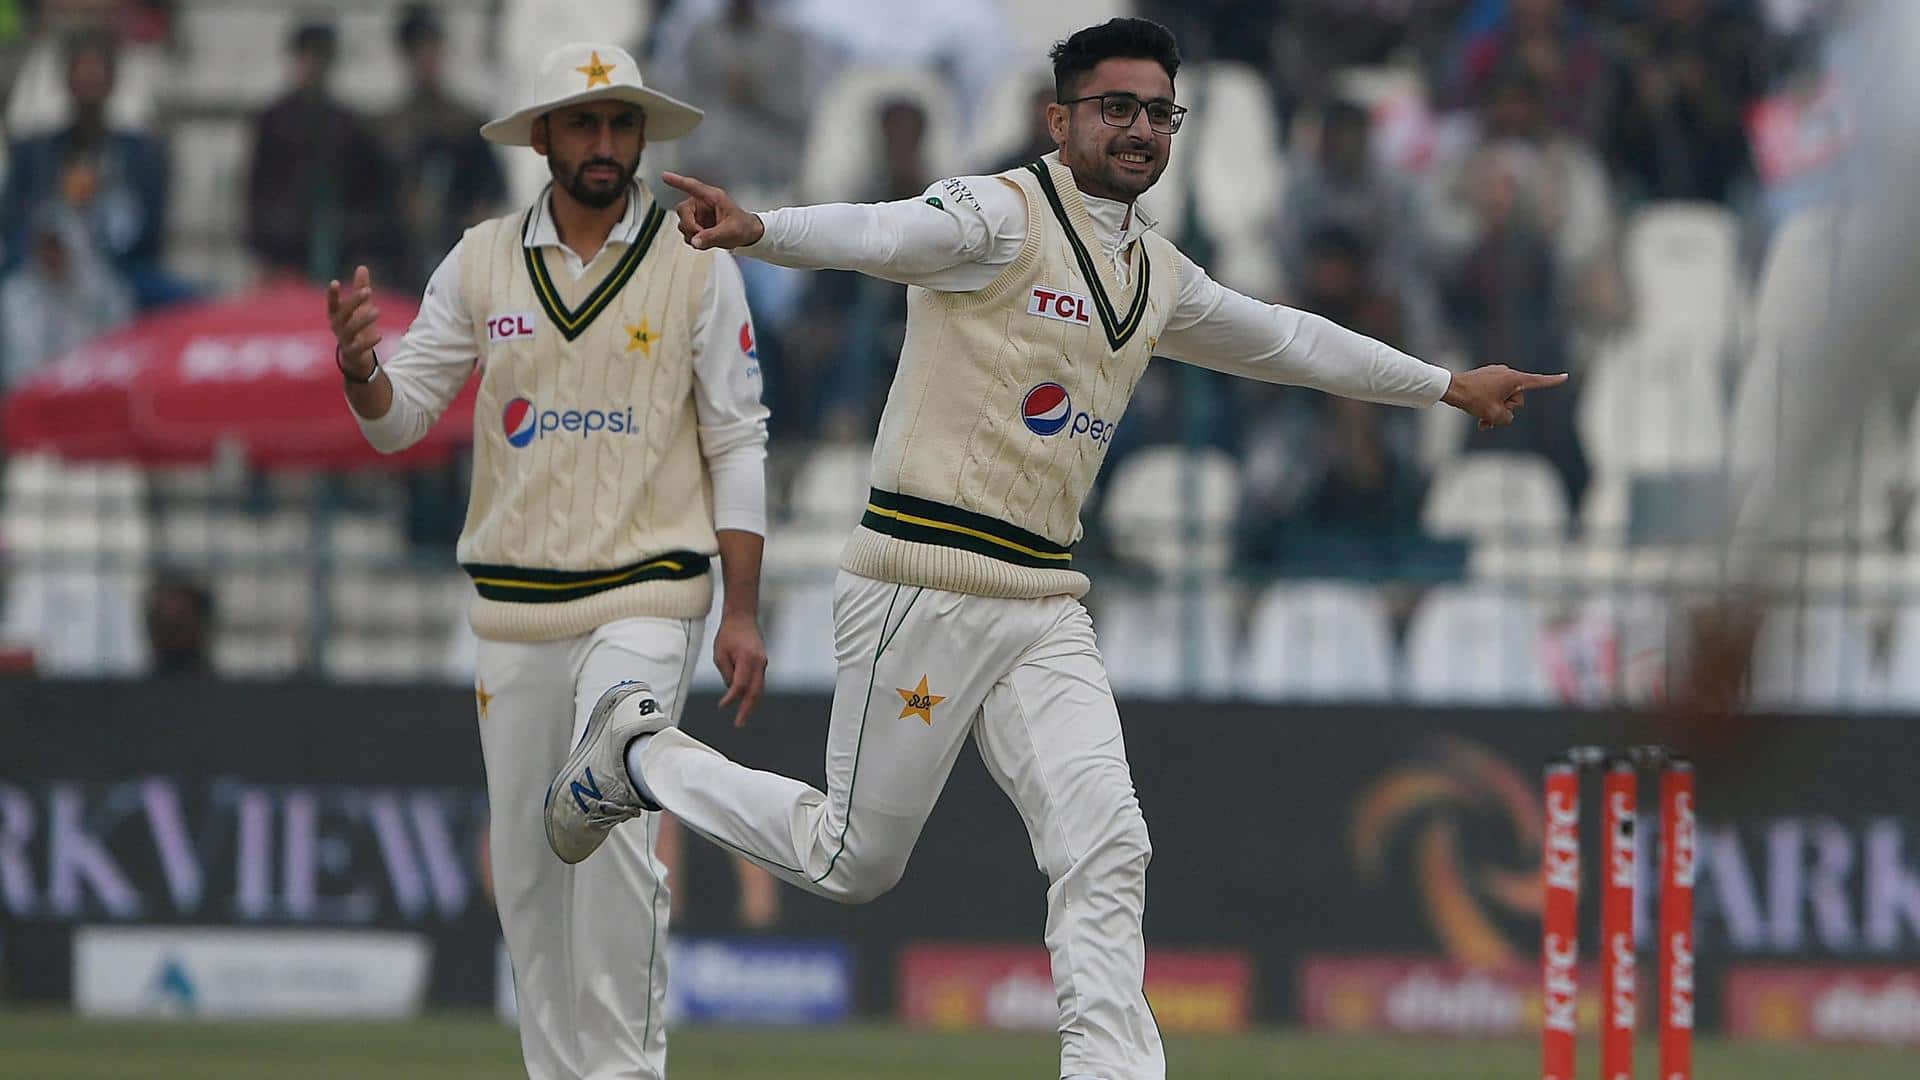 2nd Test, Day 2: England on top versus Pakistan